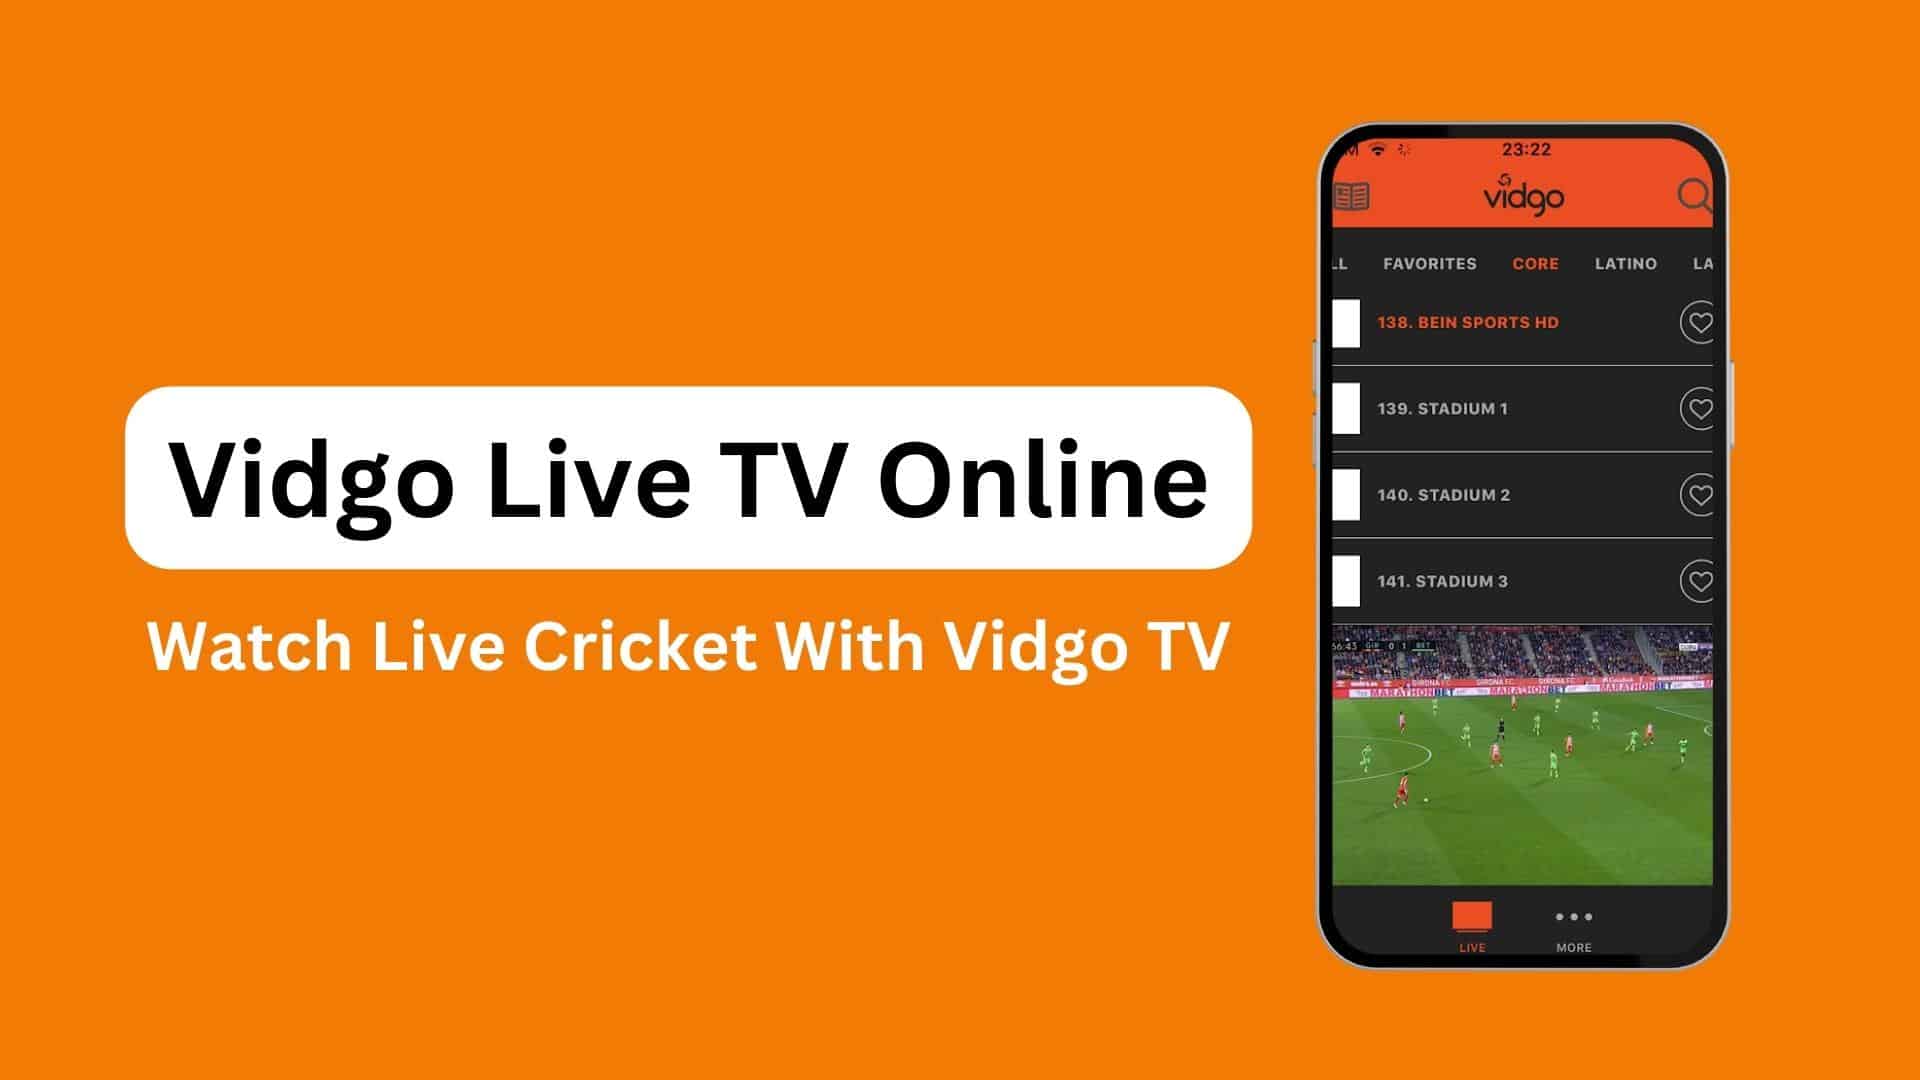 Vidgo Live TV Online - Packages, Free Trial, Local Channels